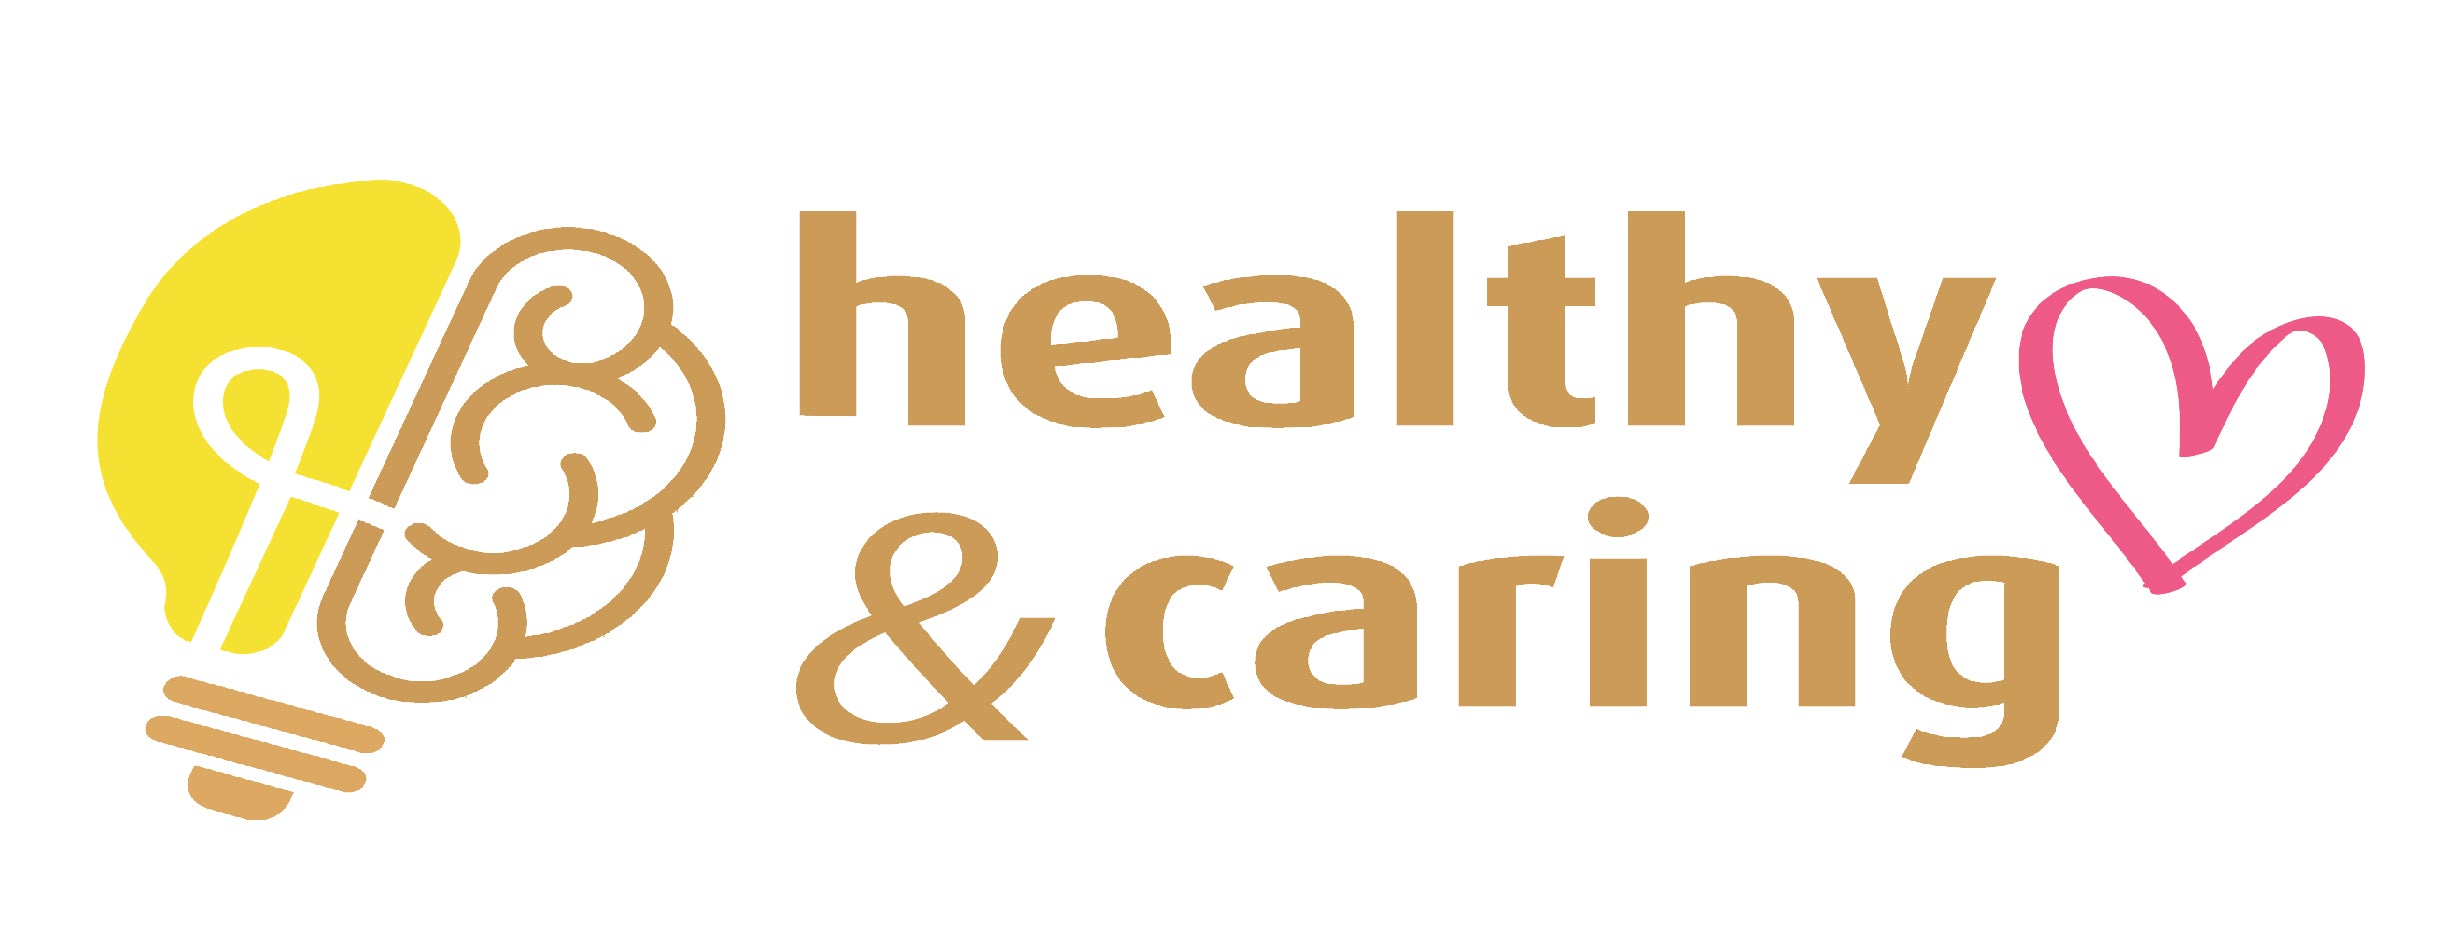 healthy and caring - Caring by Hediger GmbH